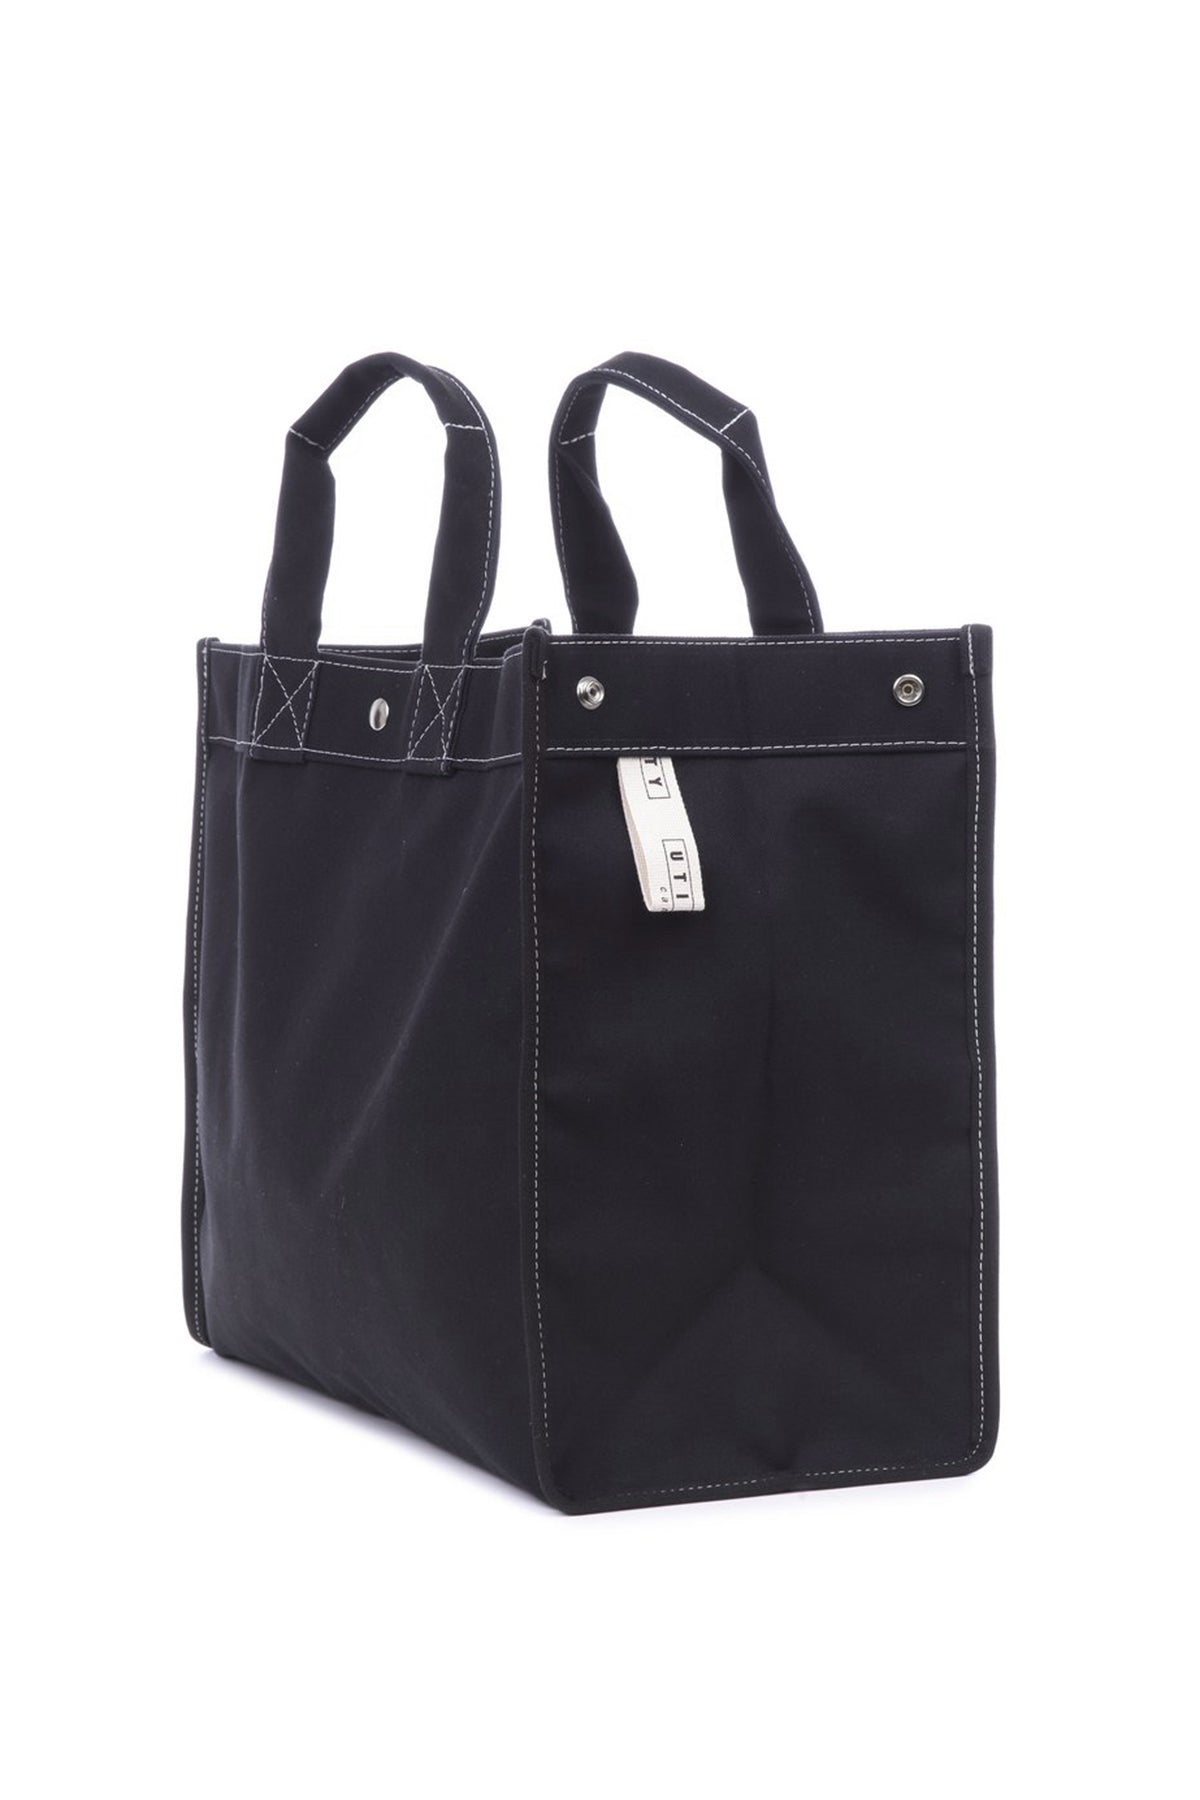 a black CLASSIC FIELD BAG BY UTILITY CANVAS tote bag with two handles by Utility Canvas.-8138765008977